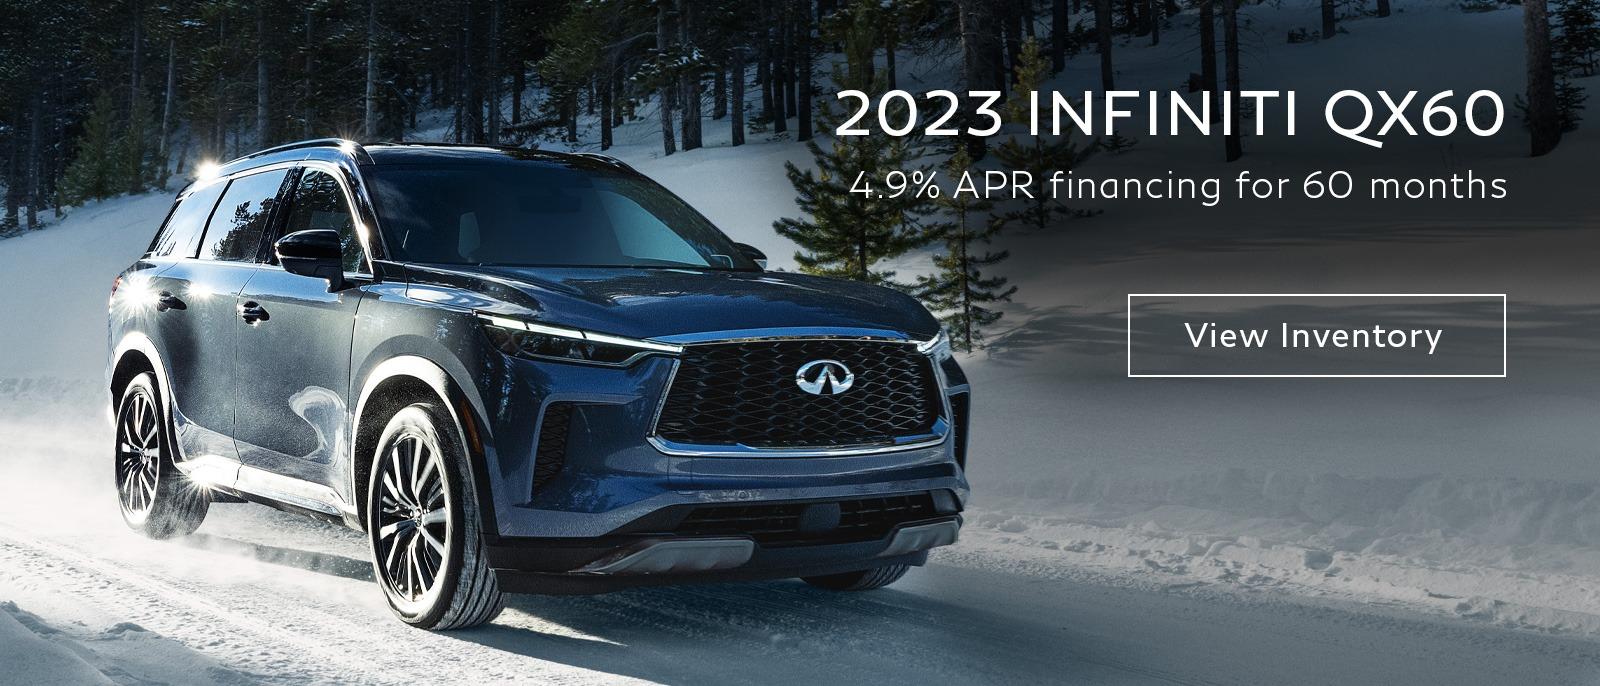 4.9% APR Financing for 60 months on 2023 INFINITI QX60